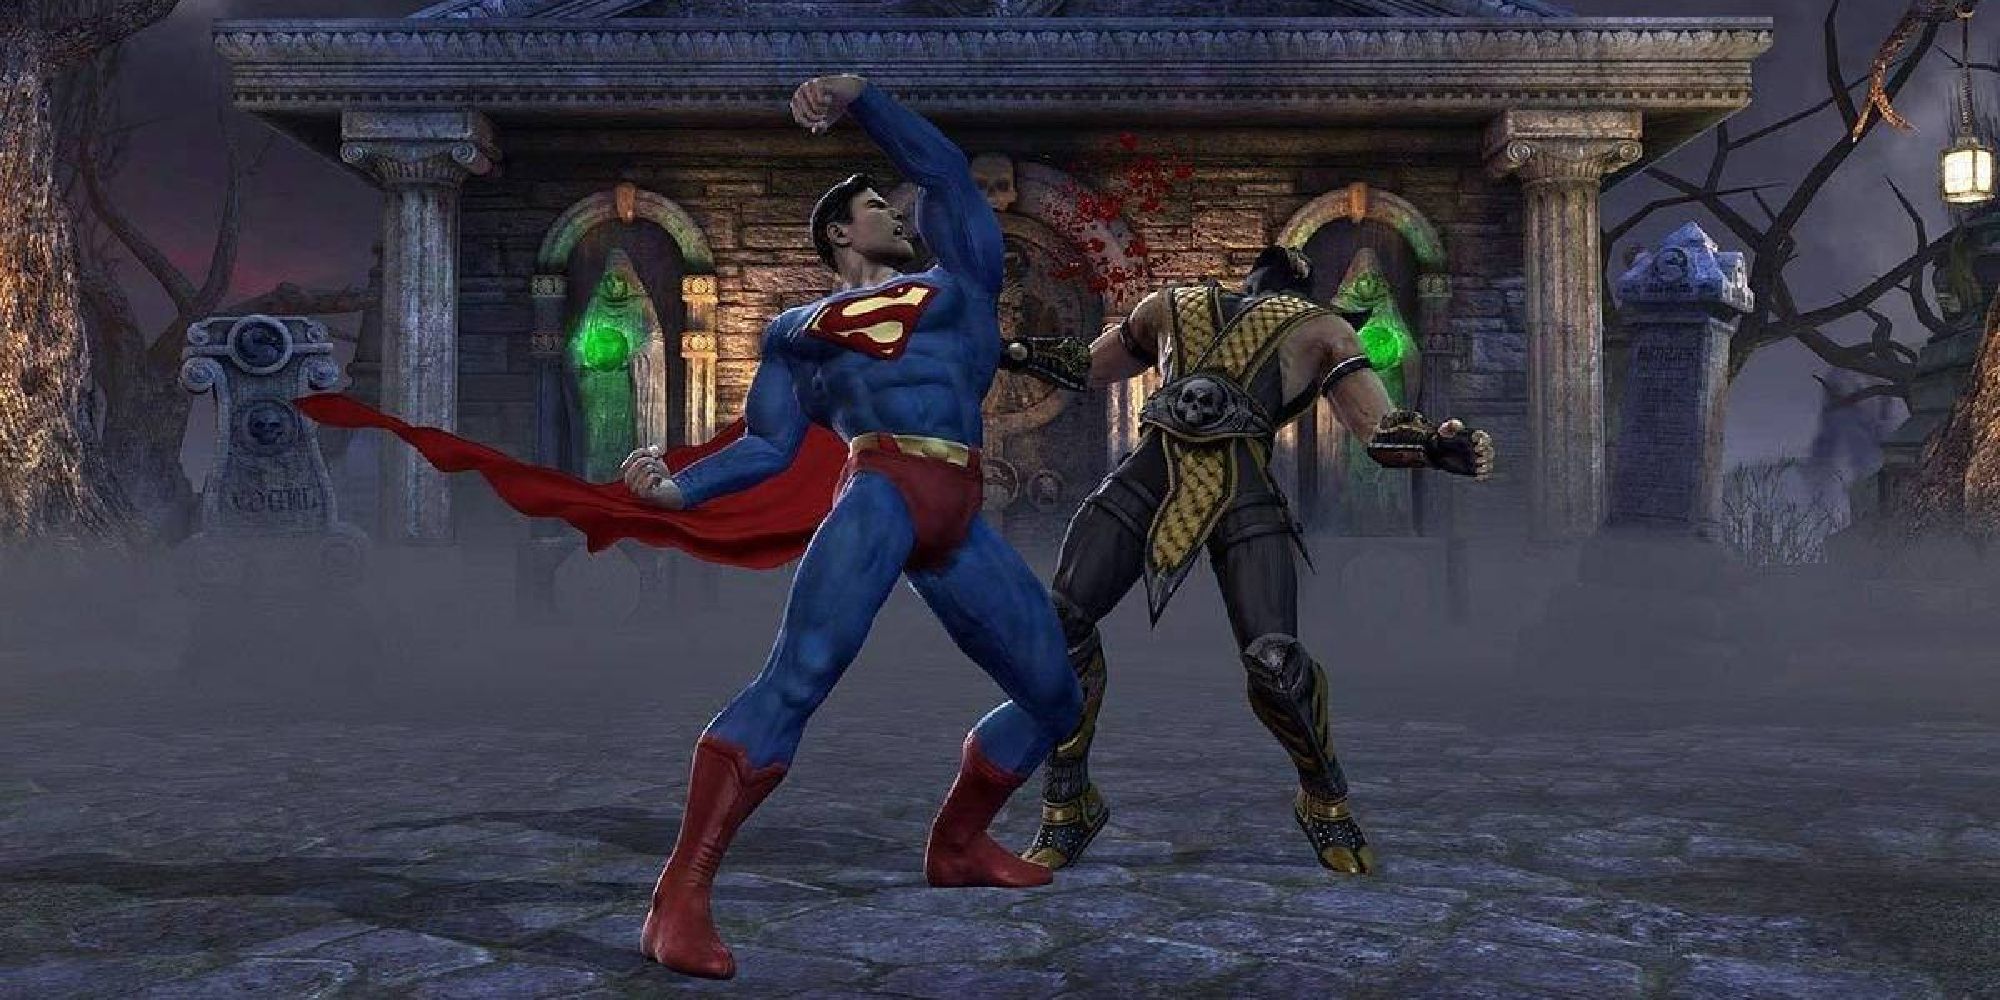 Superman performing an uppercut on Scorpion, with particles of blood splattering from Scorpion's face.